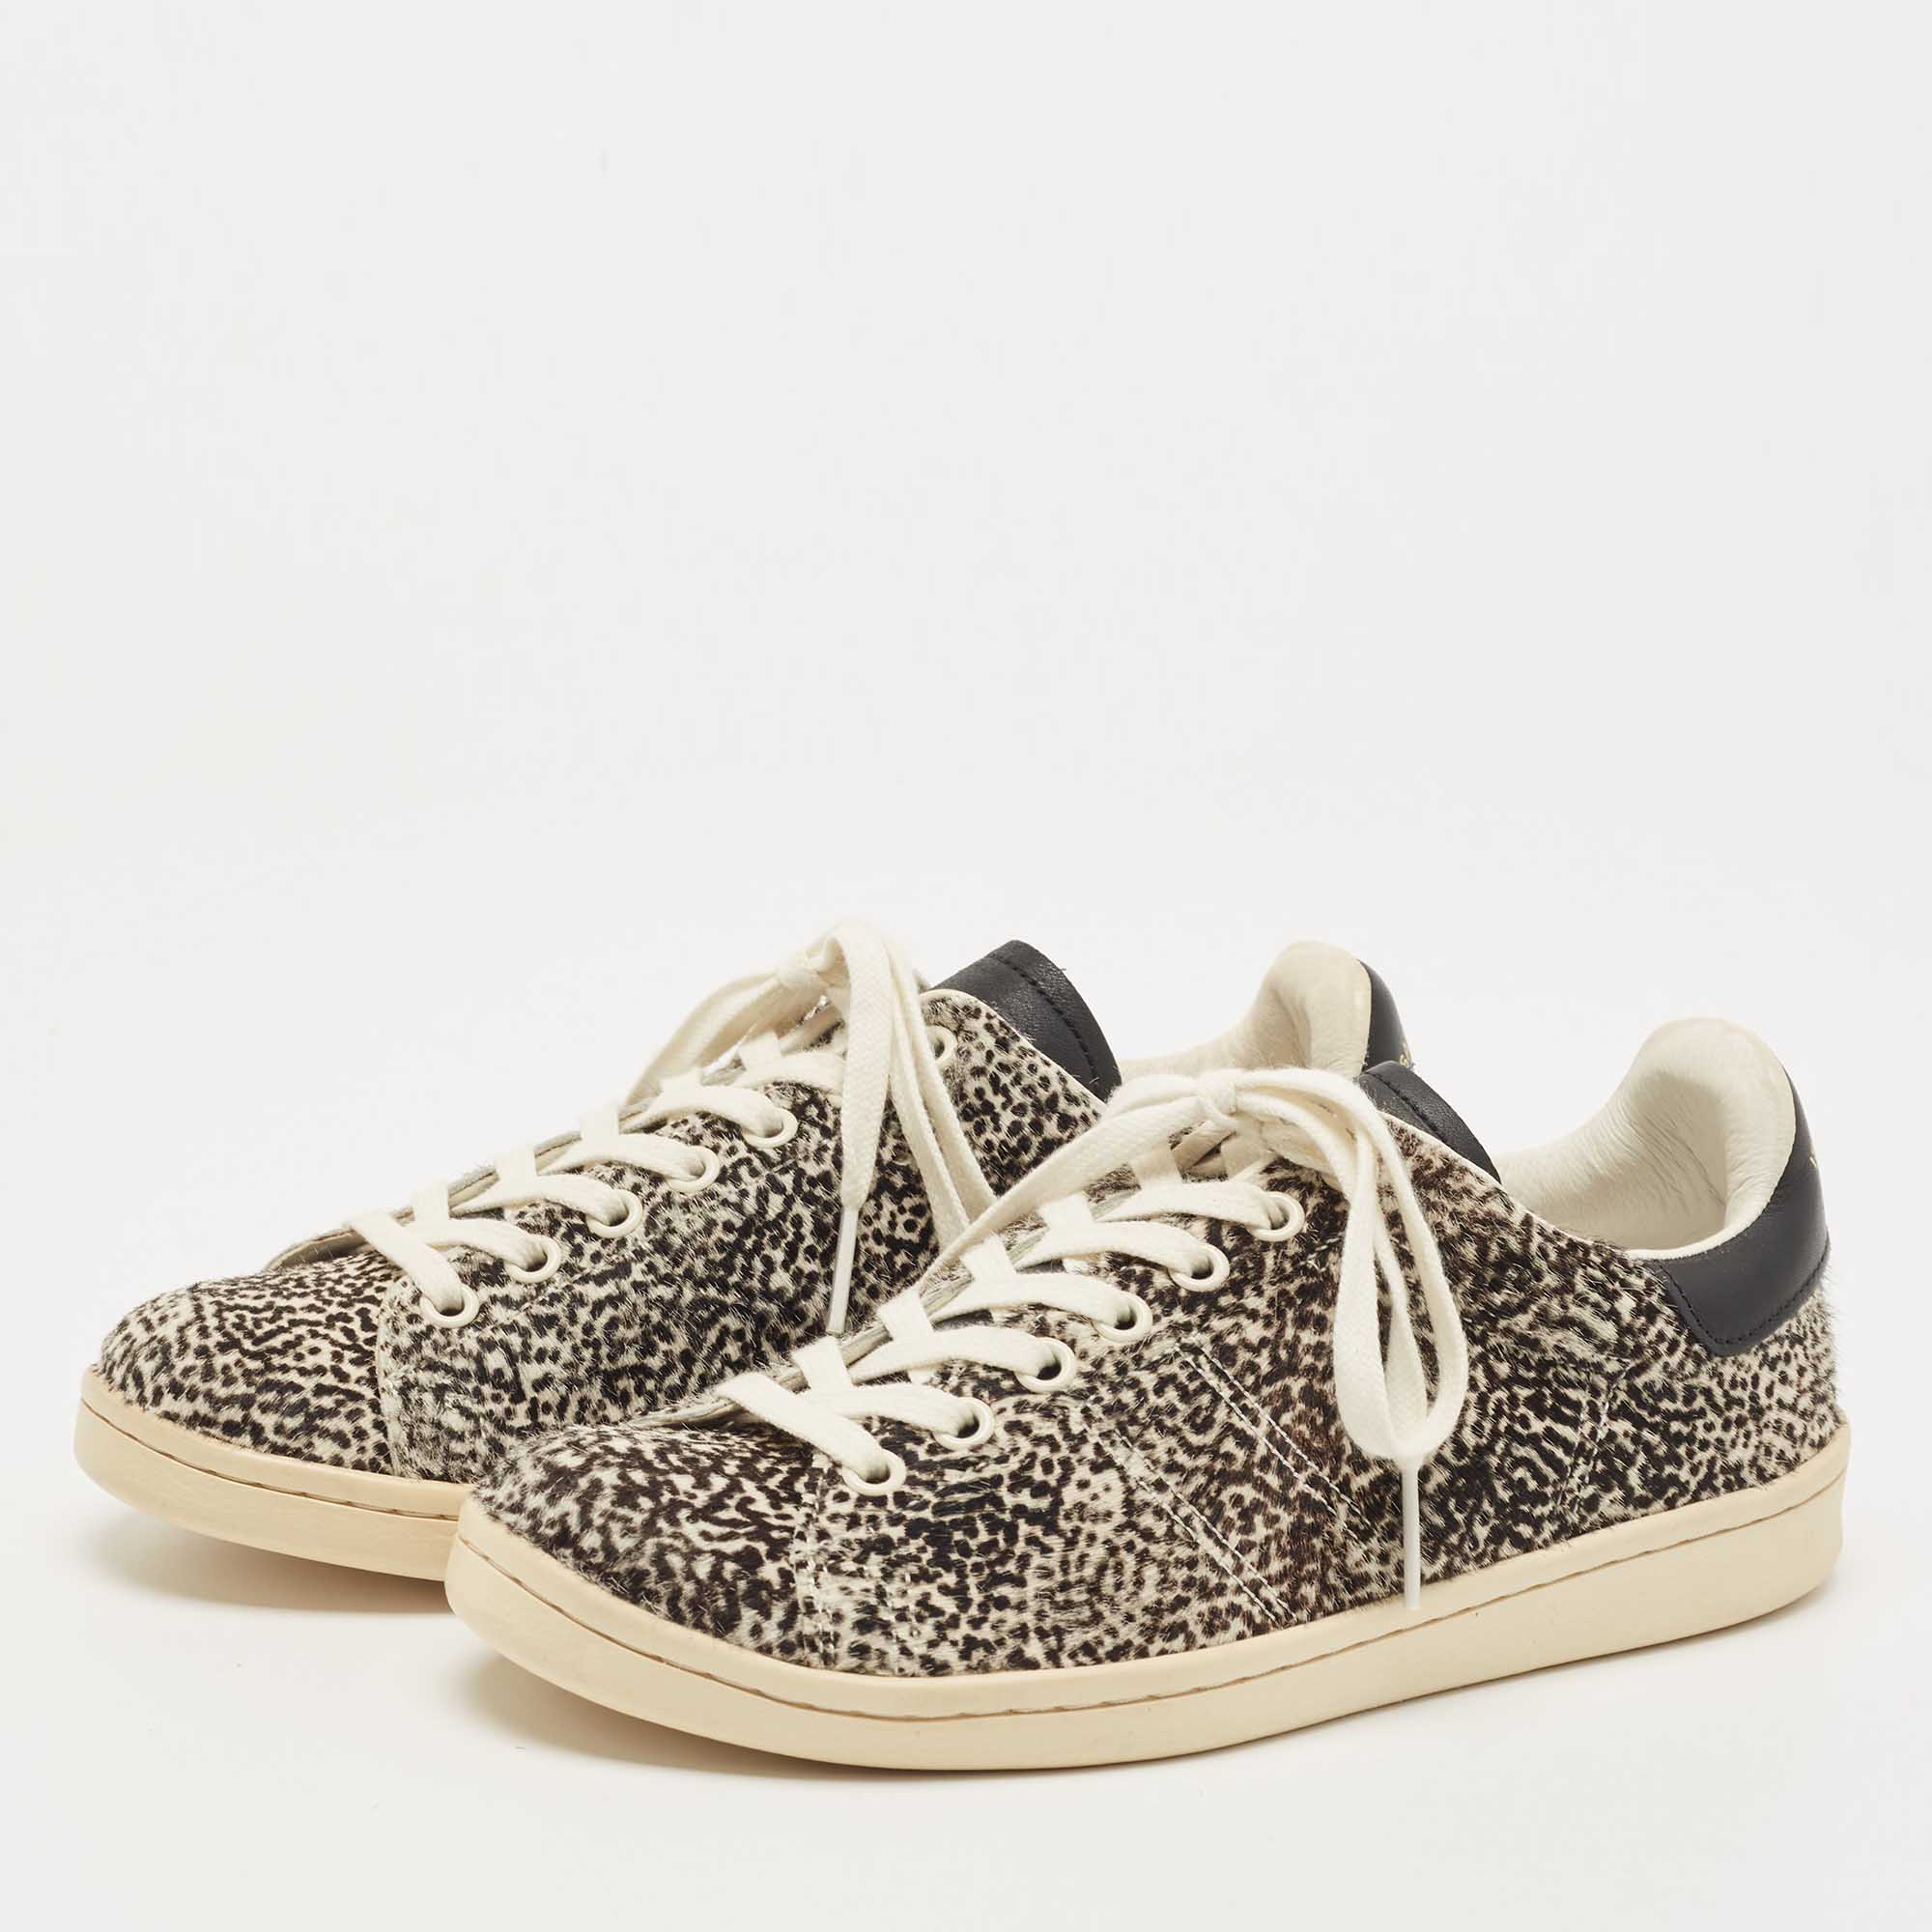 

Isabel Marant Two Tone Animal Print Calf Hair and Leather Bart Sneakers Size, Brown